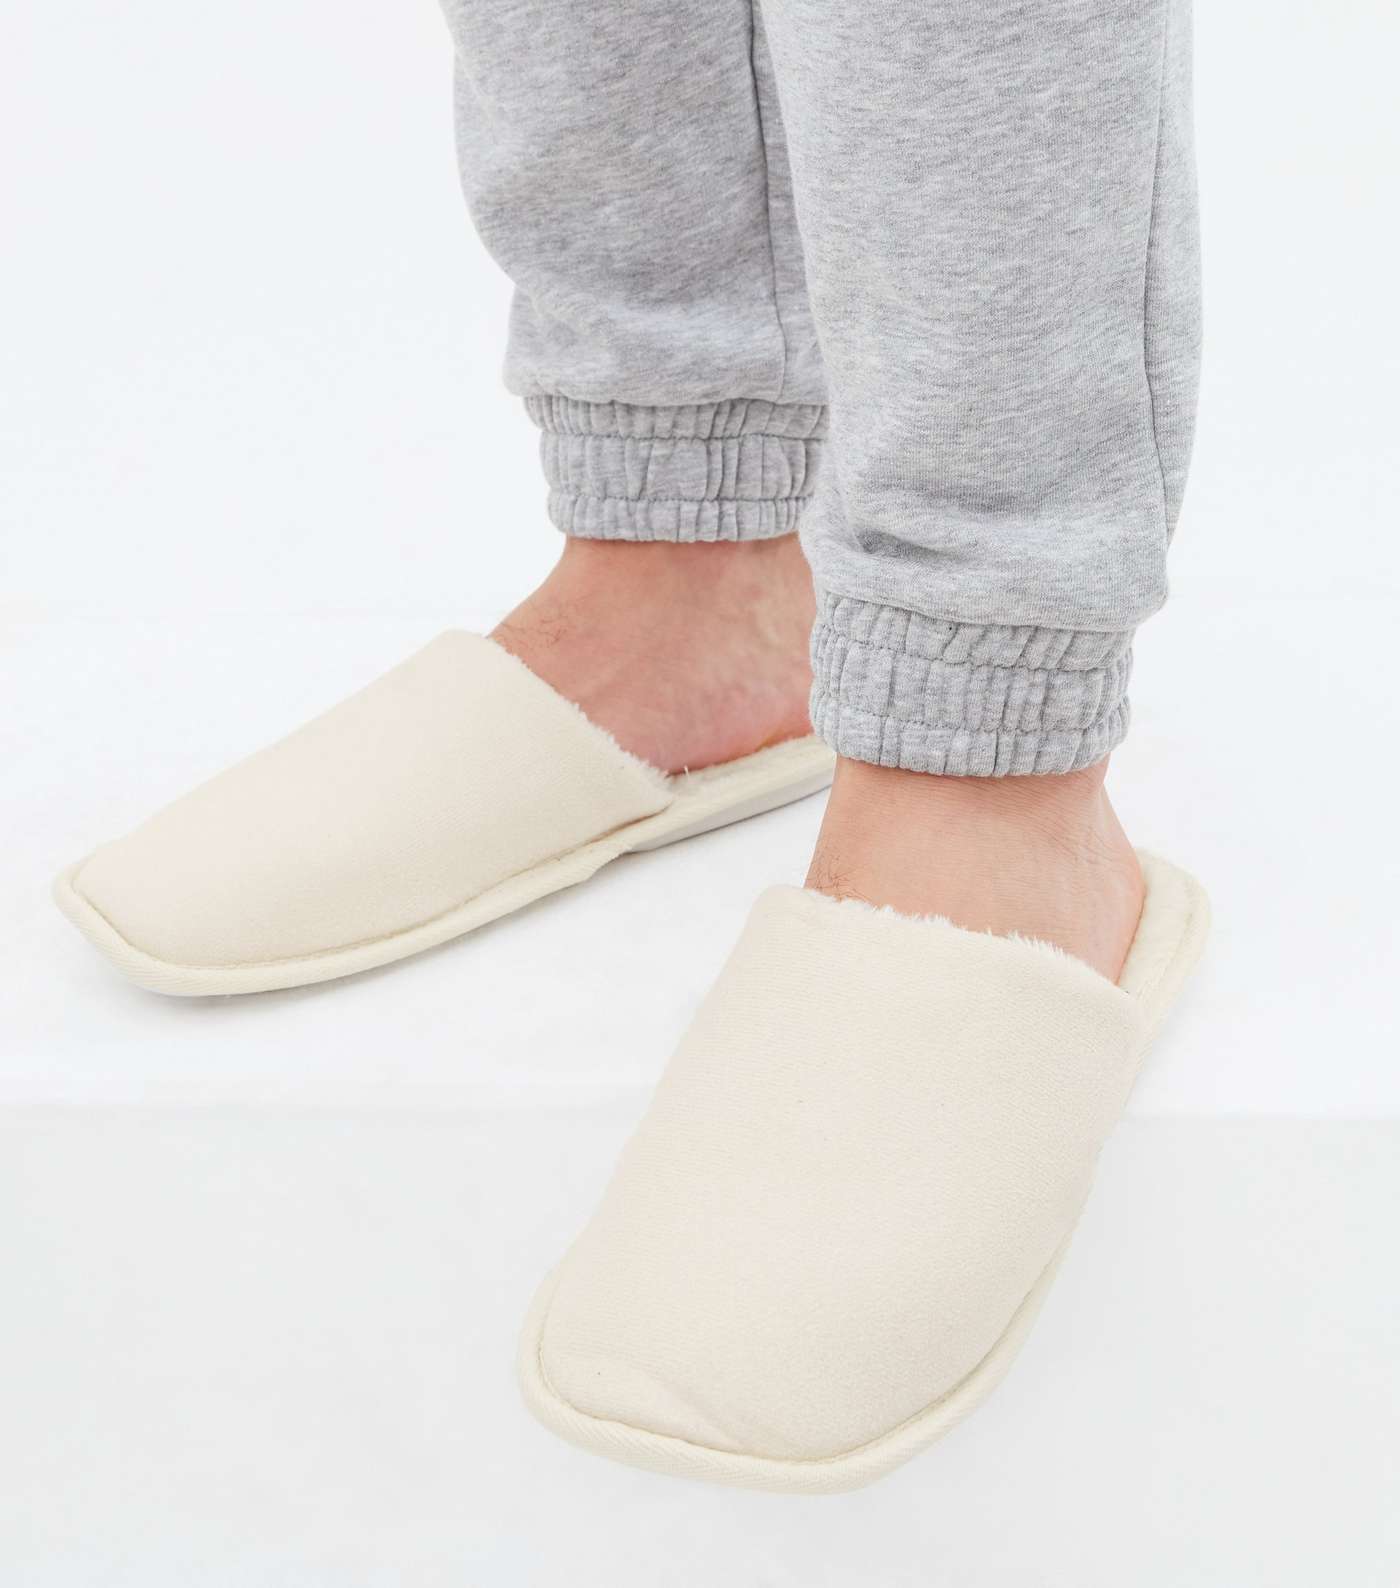 Off White Suedette Teddy Lined Mule Slippers Image 2